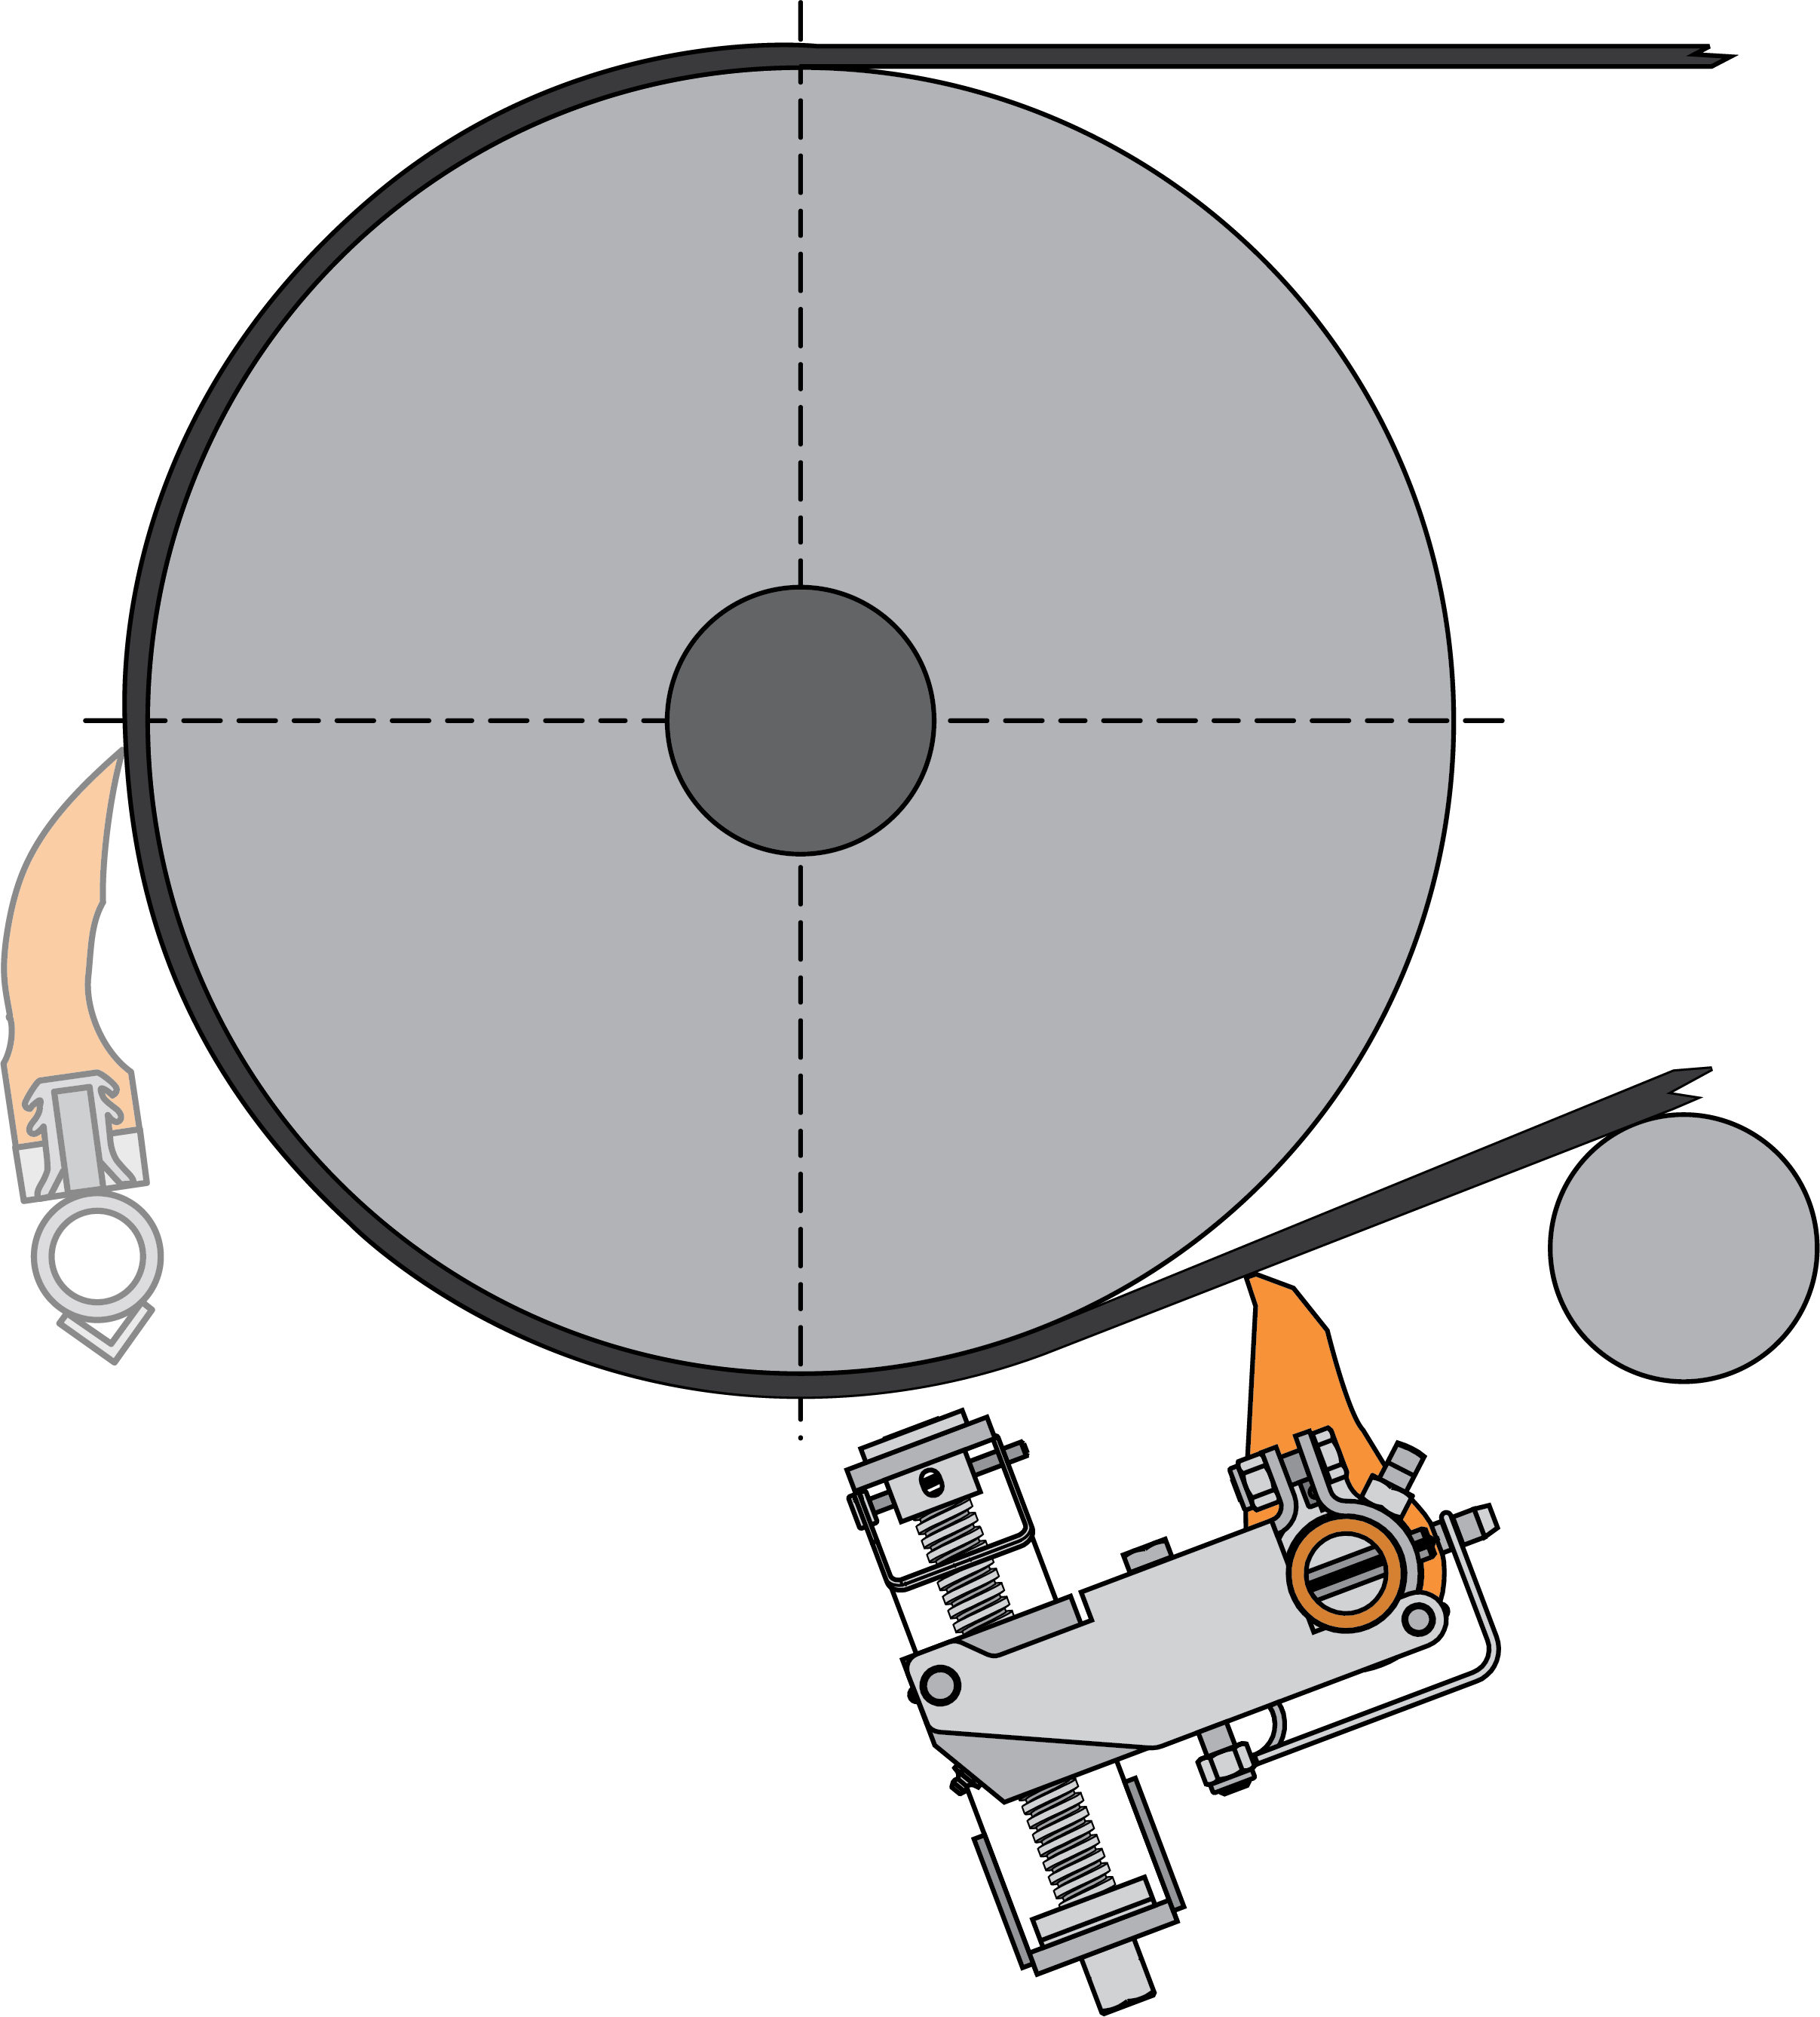 A 2-D illustration showing a secondary cleaner installed under the head pulley just behind where the belt leaves the pulley.